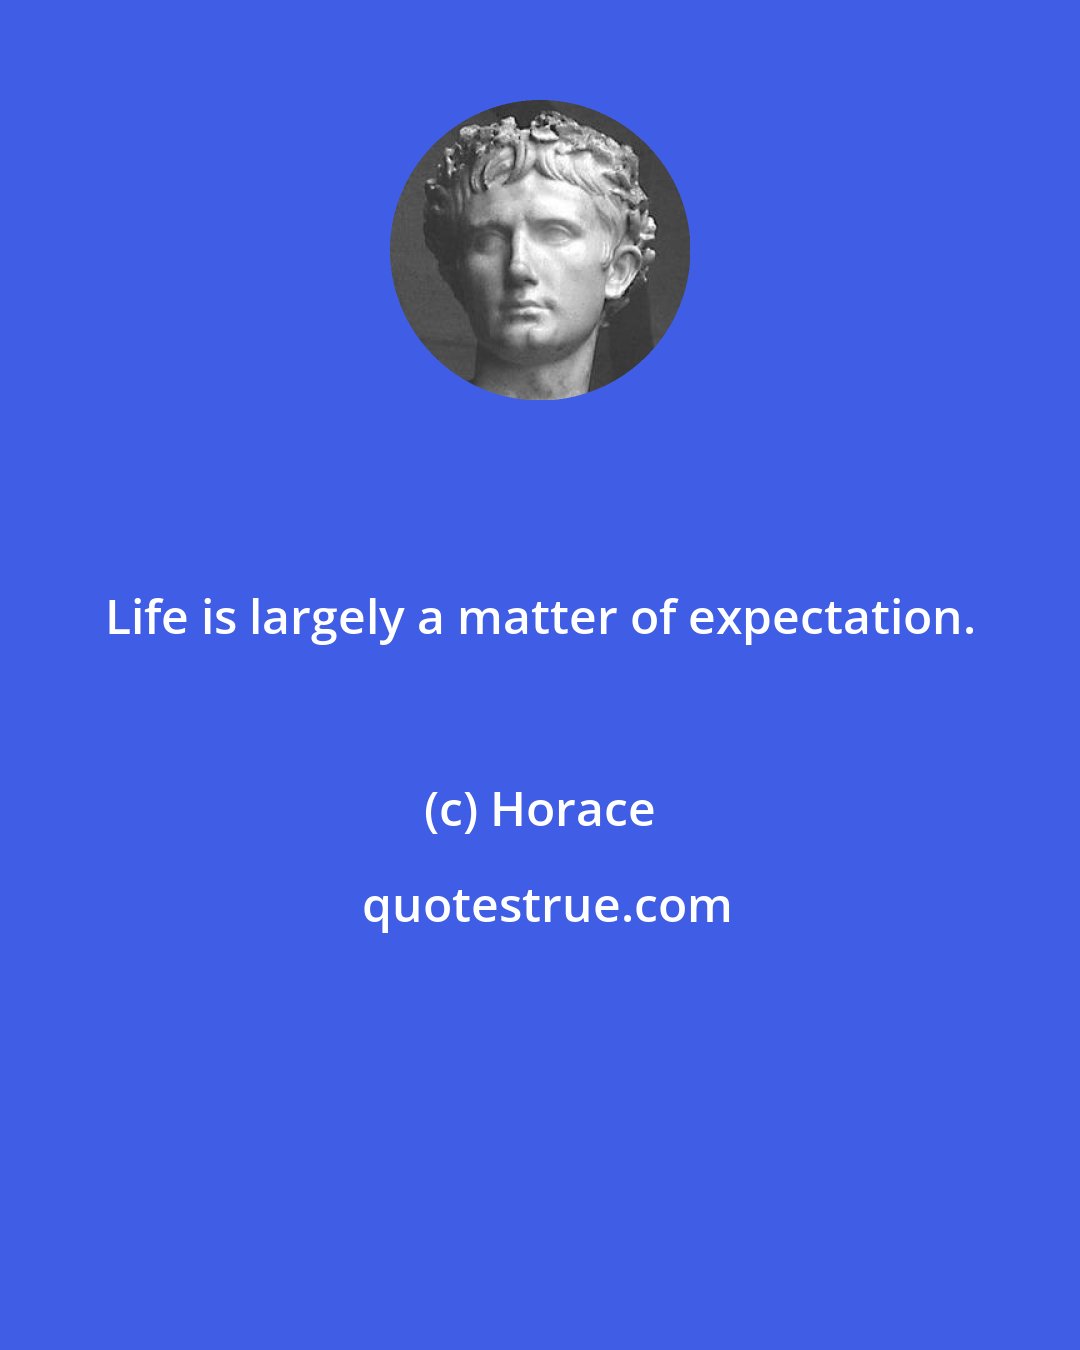 Horace: Life is largely a matter of expectation.